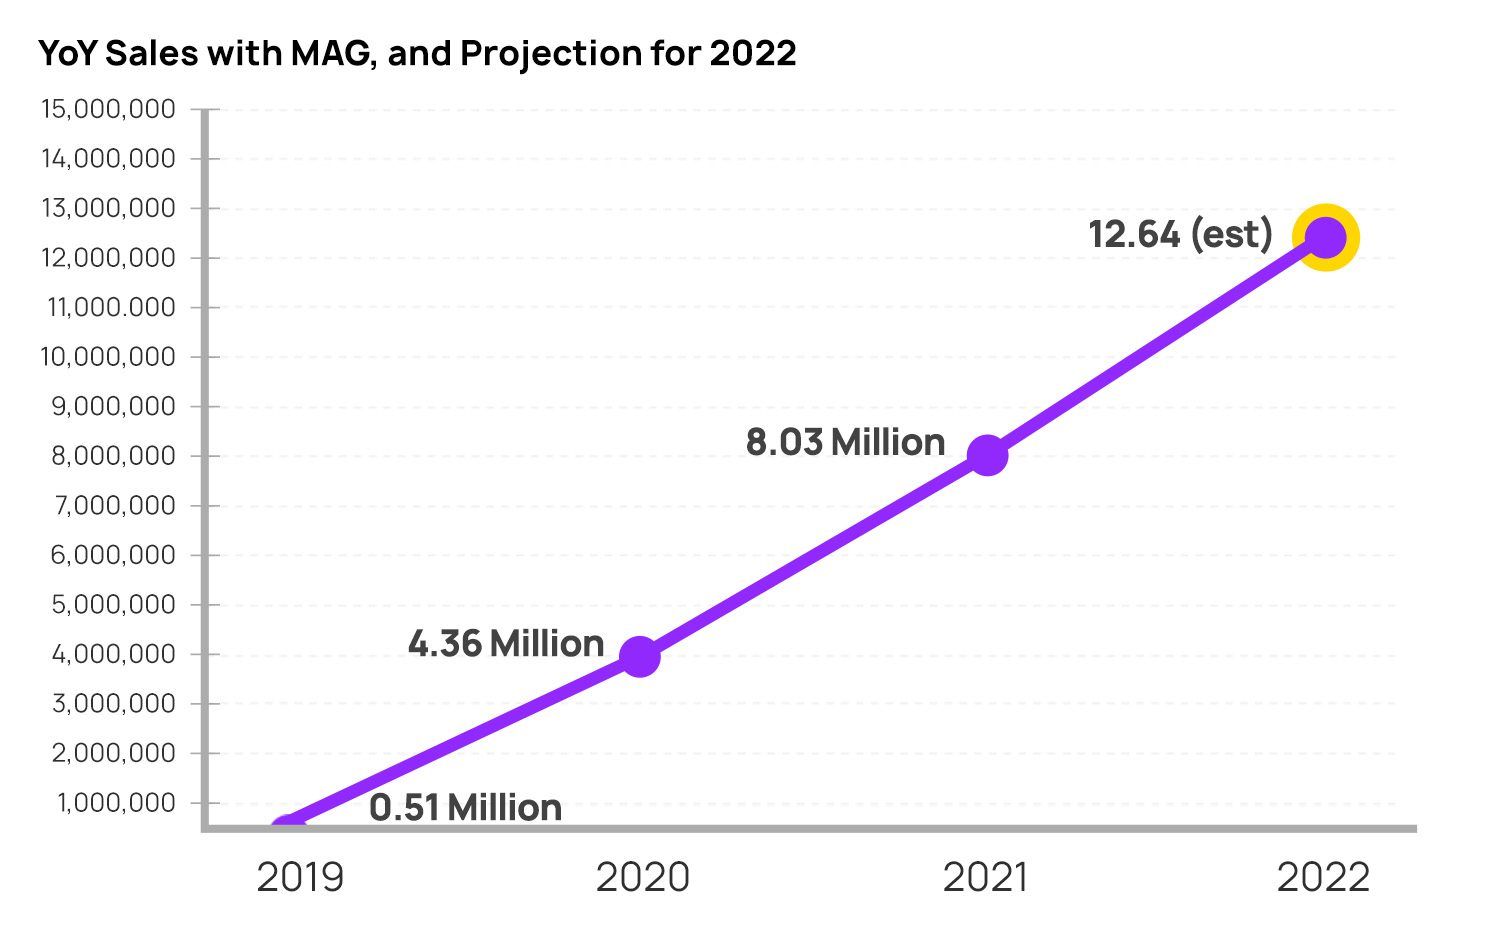 YoY Sales with MAG and Projection for 2022